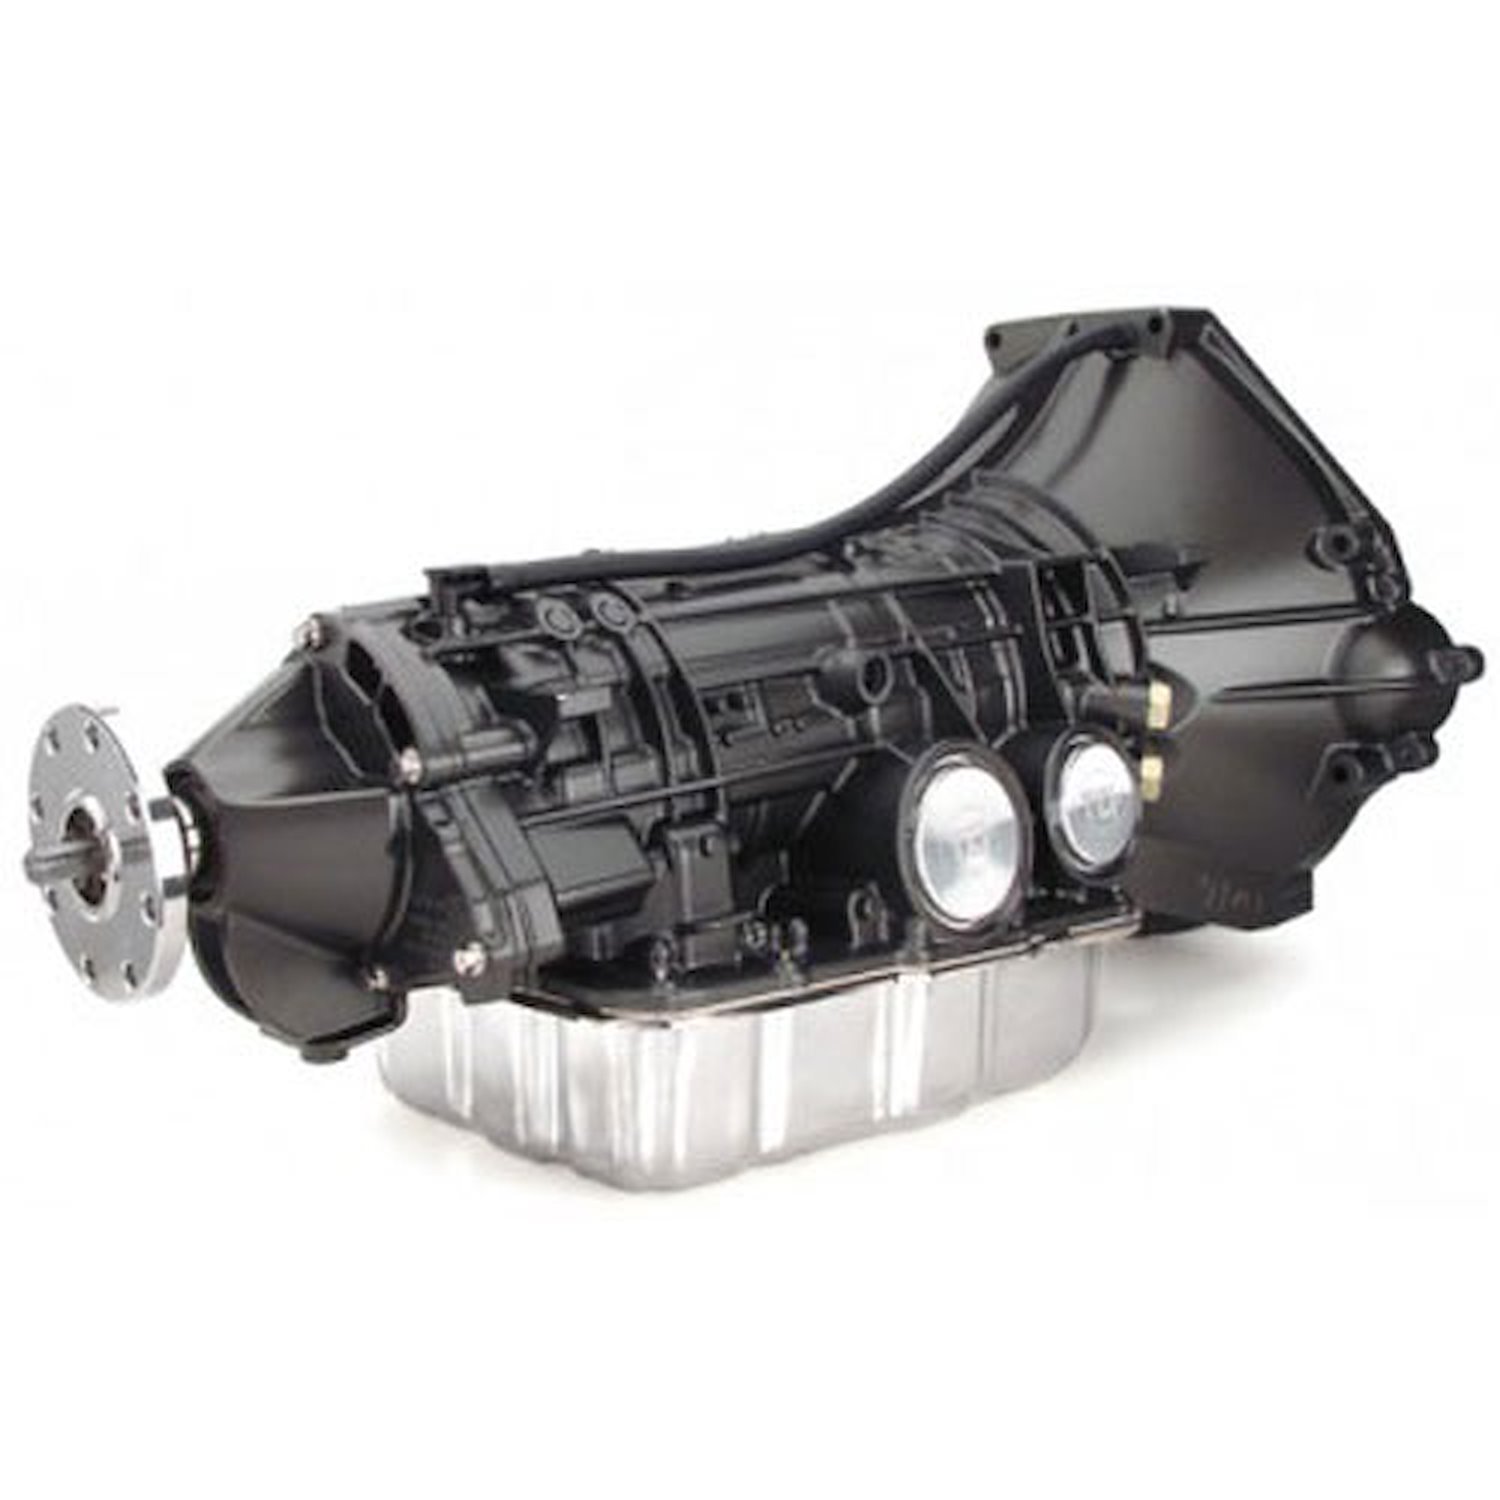 Super StreetFighter Transmission 2005-10 Mustang 5R55S (Automatic)